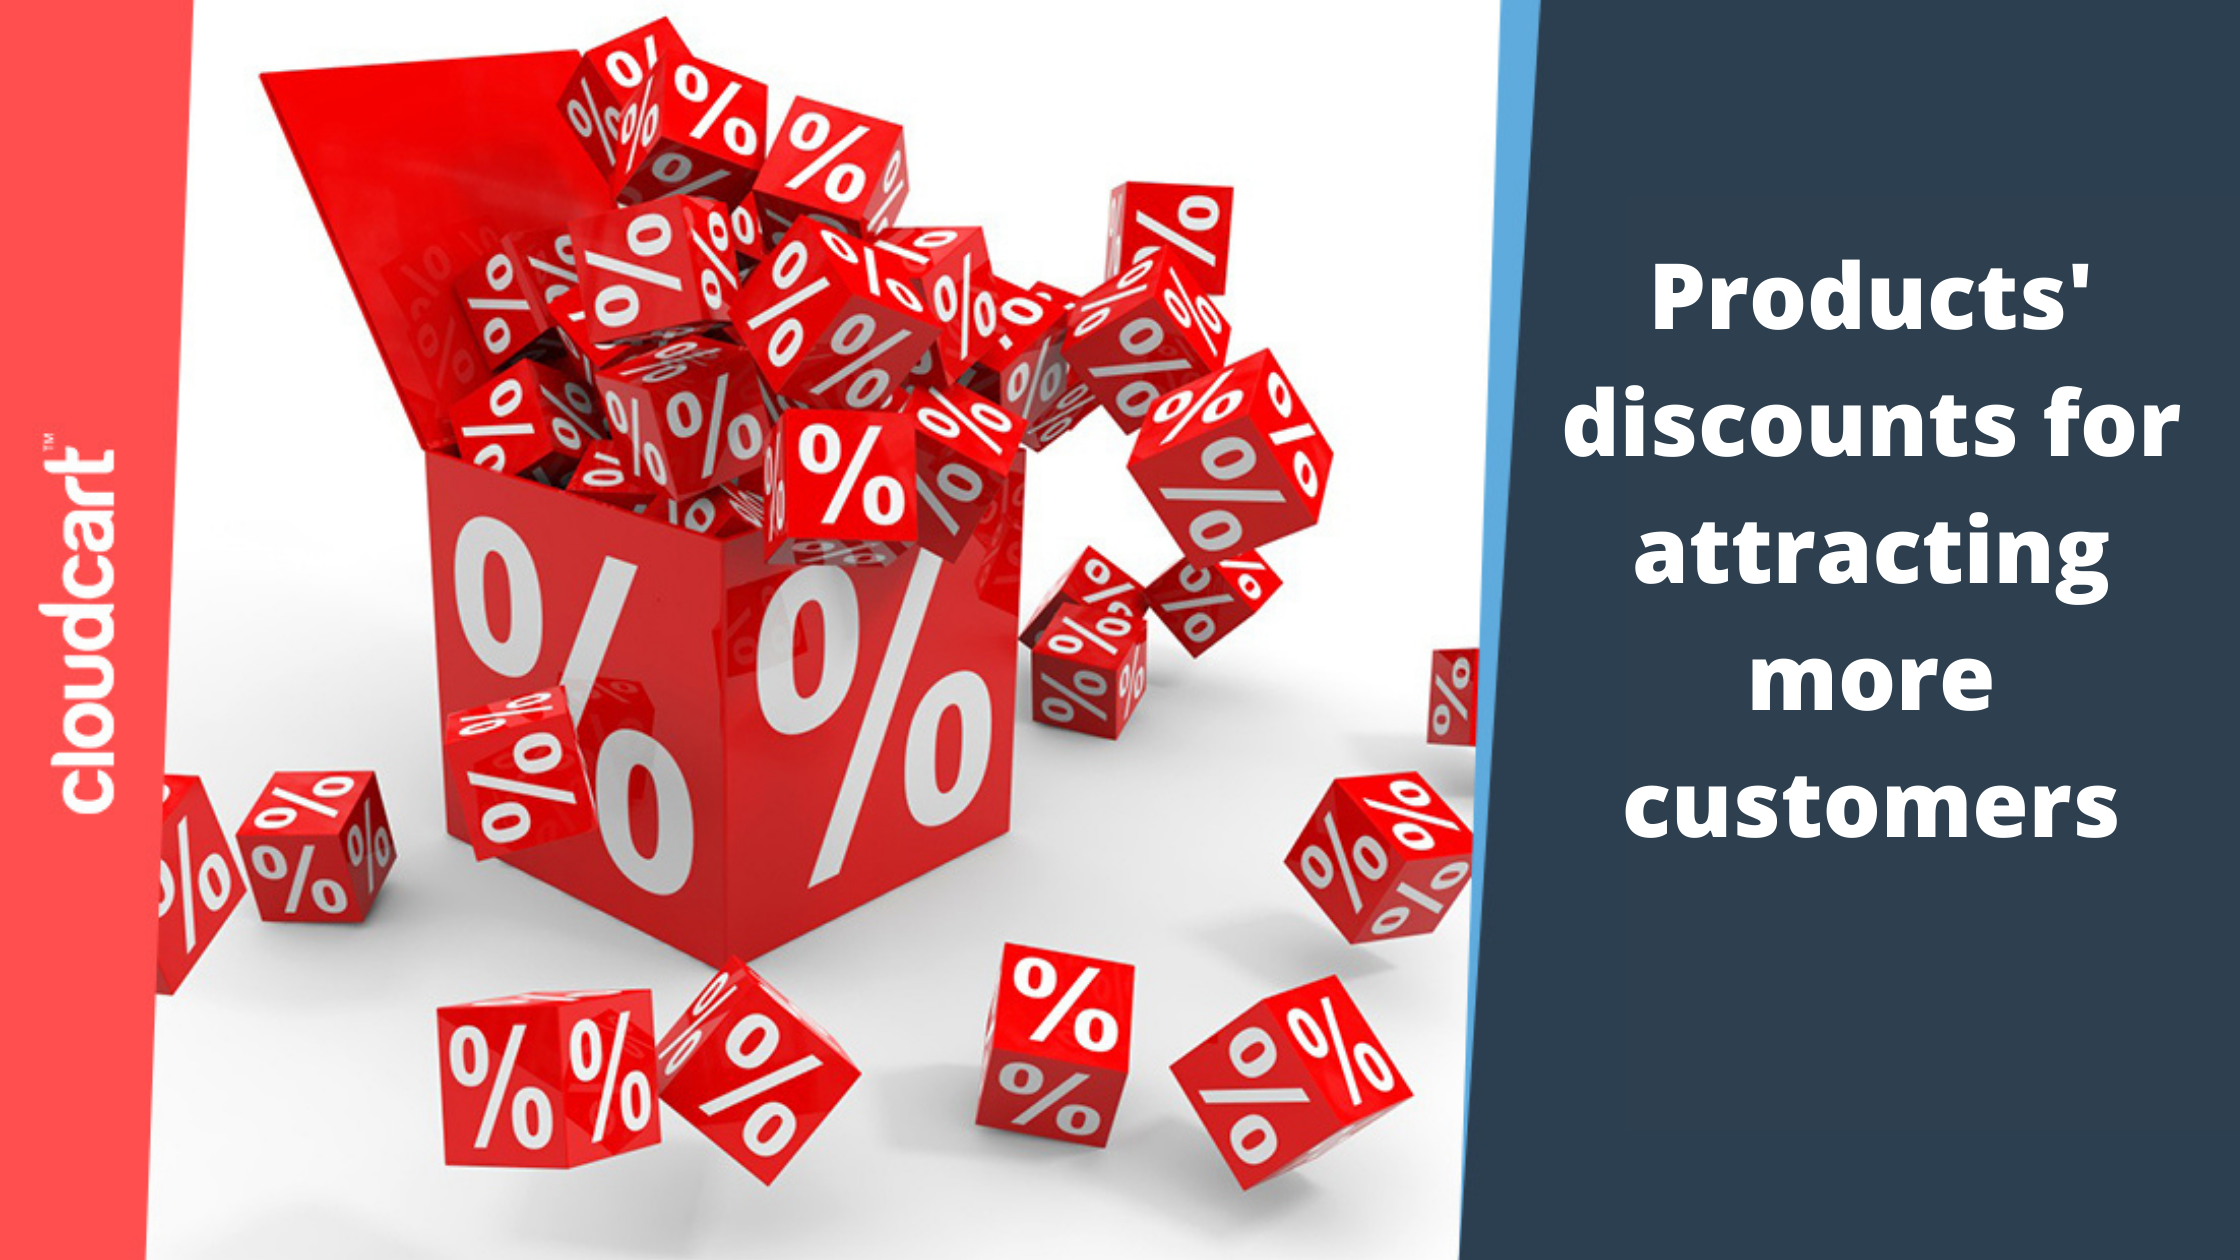 Products' discounts for attracting more customers